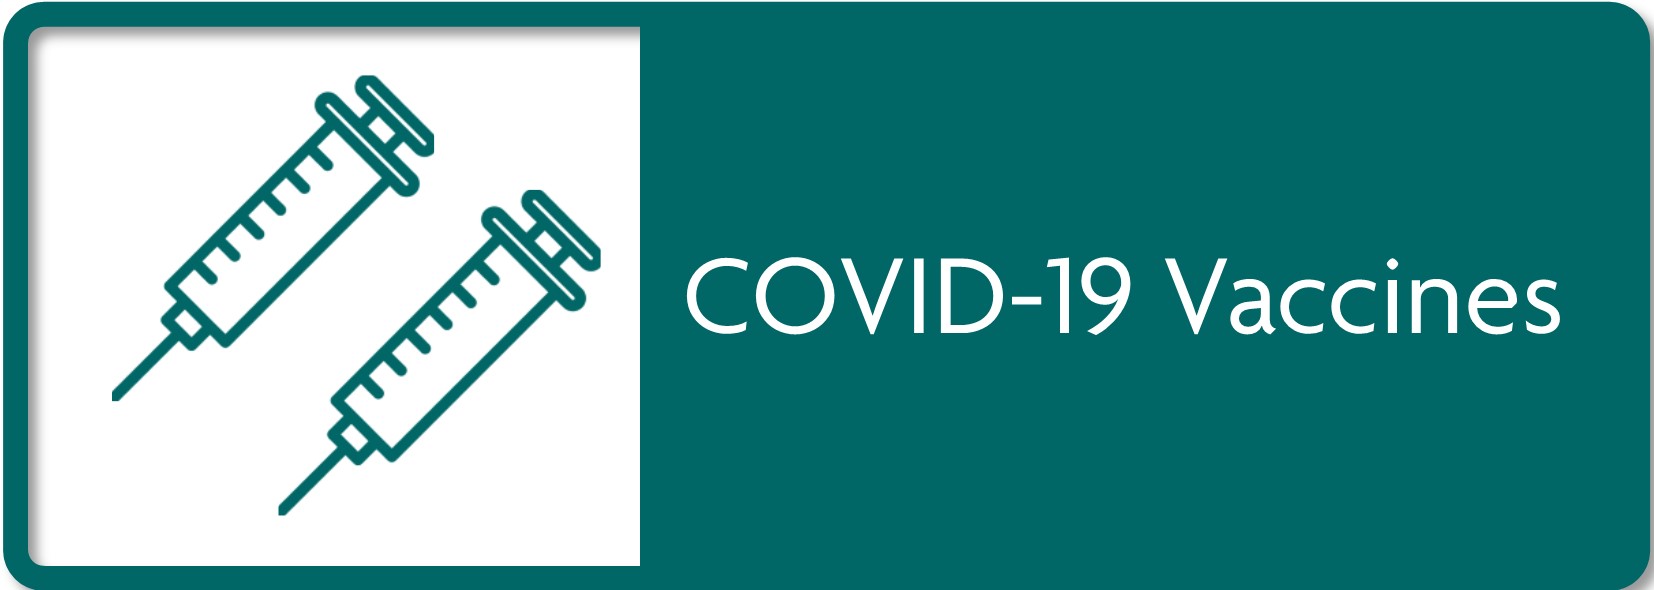 Click to go to COVID-19 Vaccines